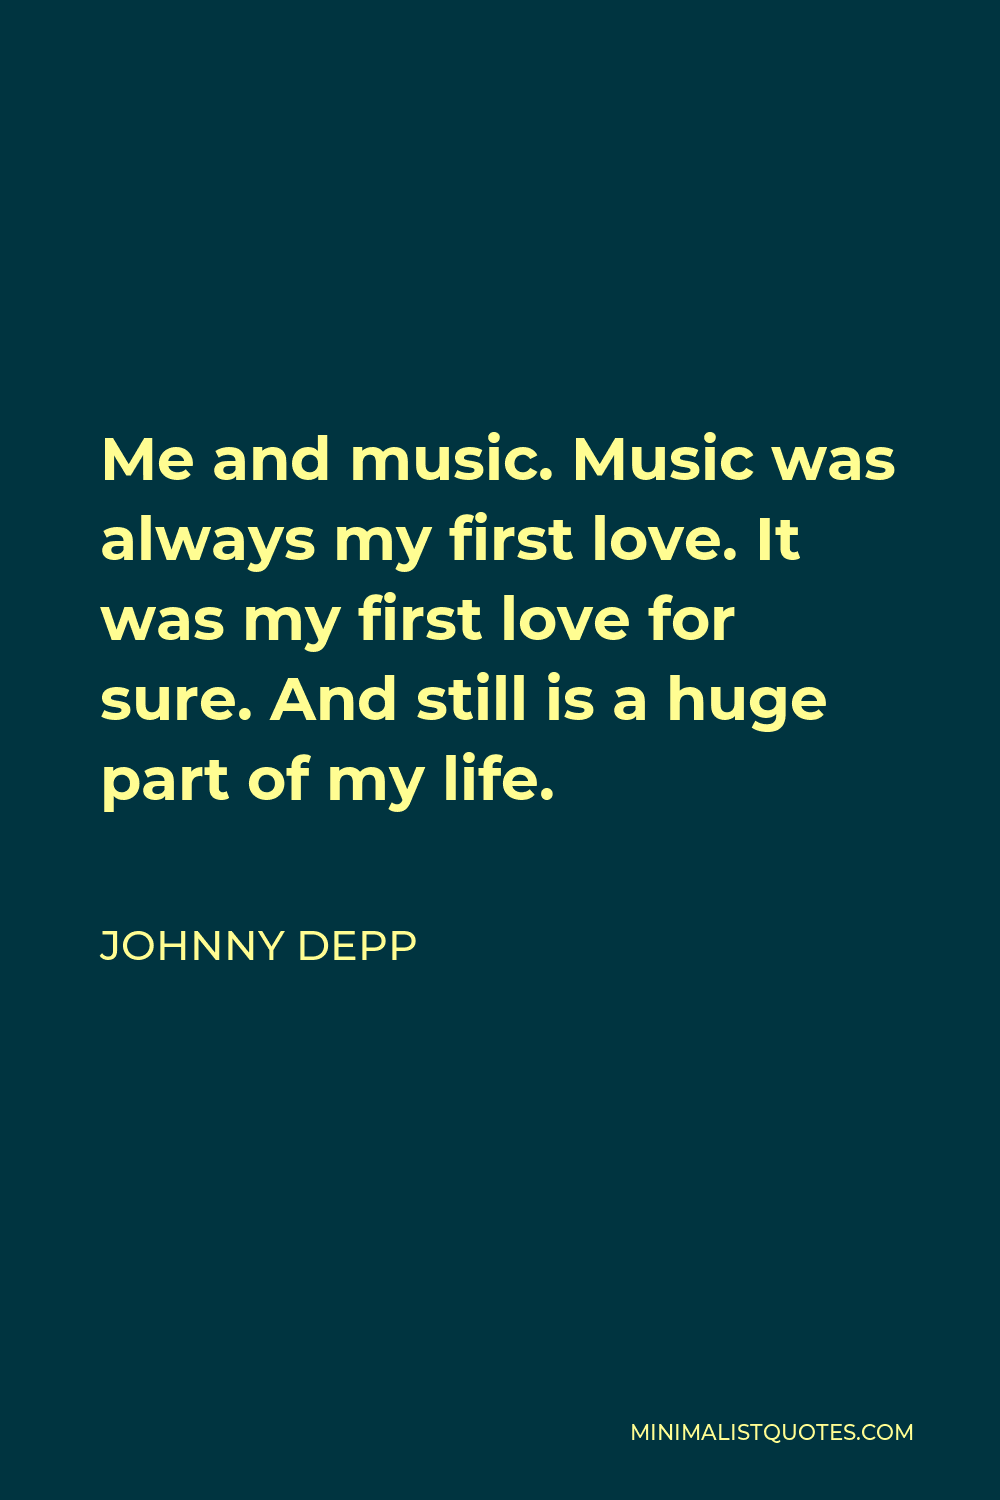 Johnny Depp Quote: Me and music. Music was always my first love. It was my  first love for sure. And still is a huge part of my life.